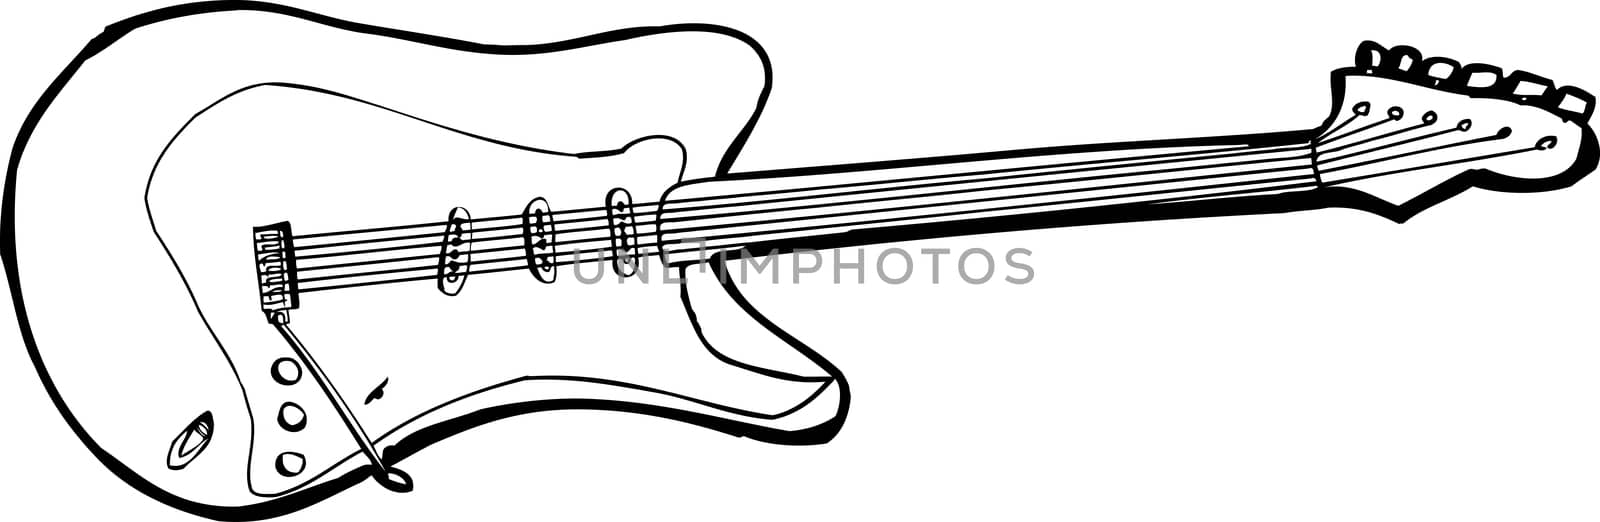 Outlined Electric Guitar by TheBlackRhino